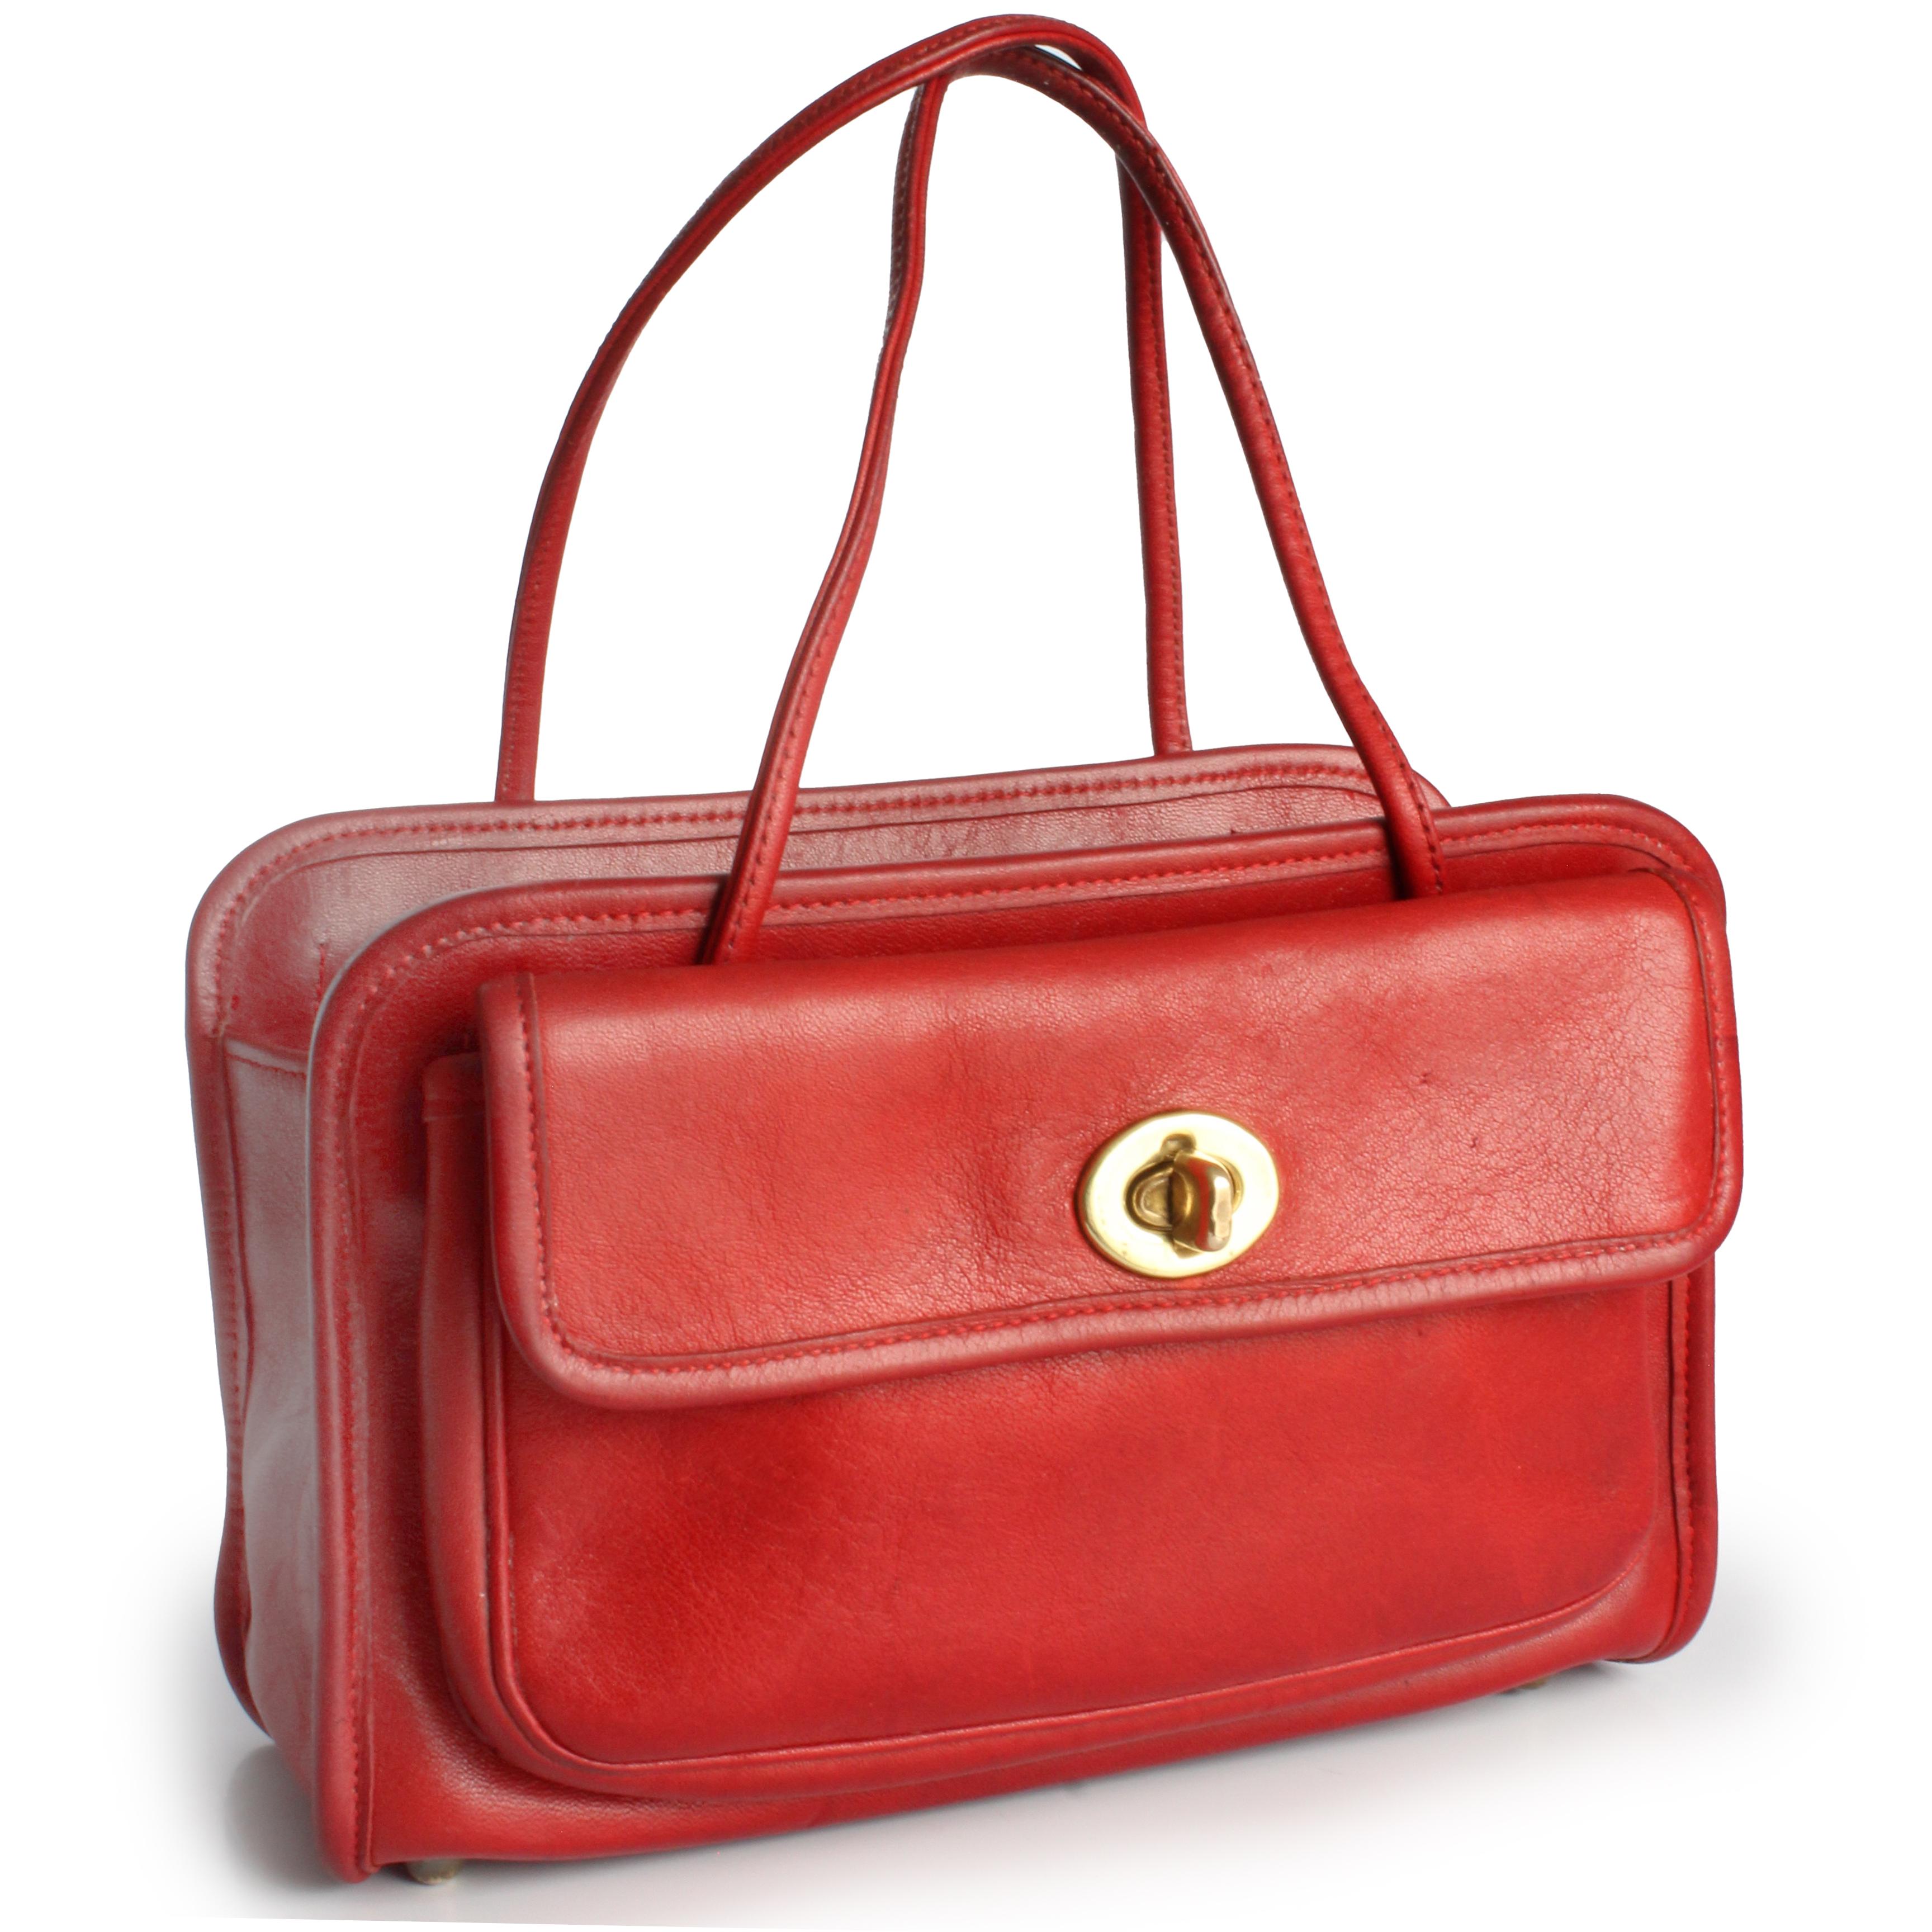 Preowned, vintage Bonnie Cashin for Coach Mini Safari tote bag, likely made in the late 1960s.  

A unicorn.  These bags rarely if ever come up for sale, especially in this color!  Made from red leather, this chic little bag features turn lock